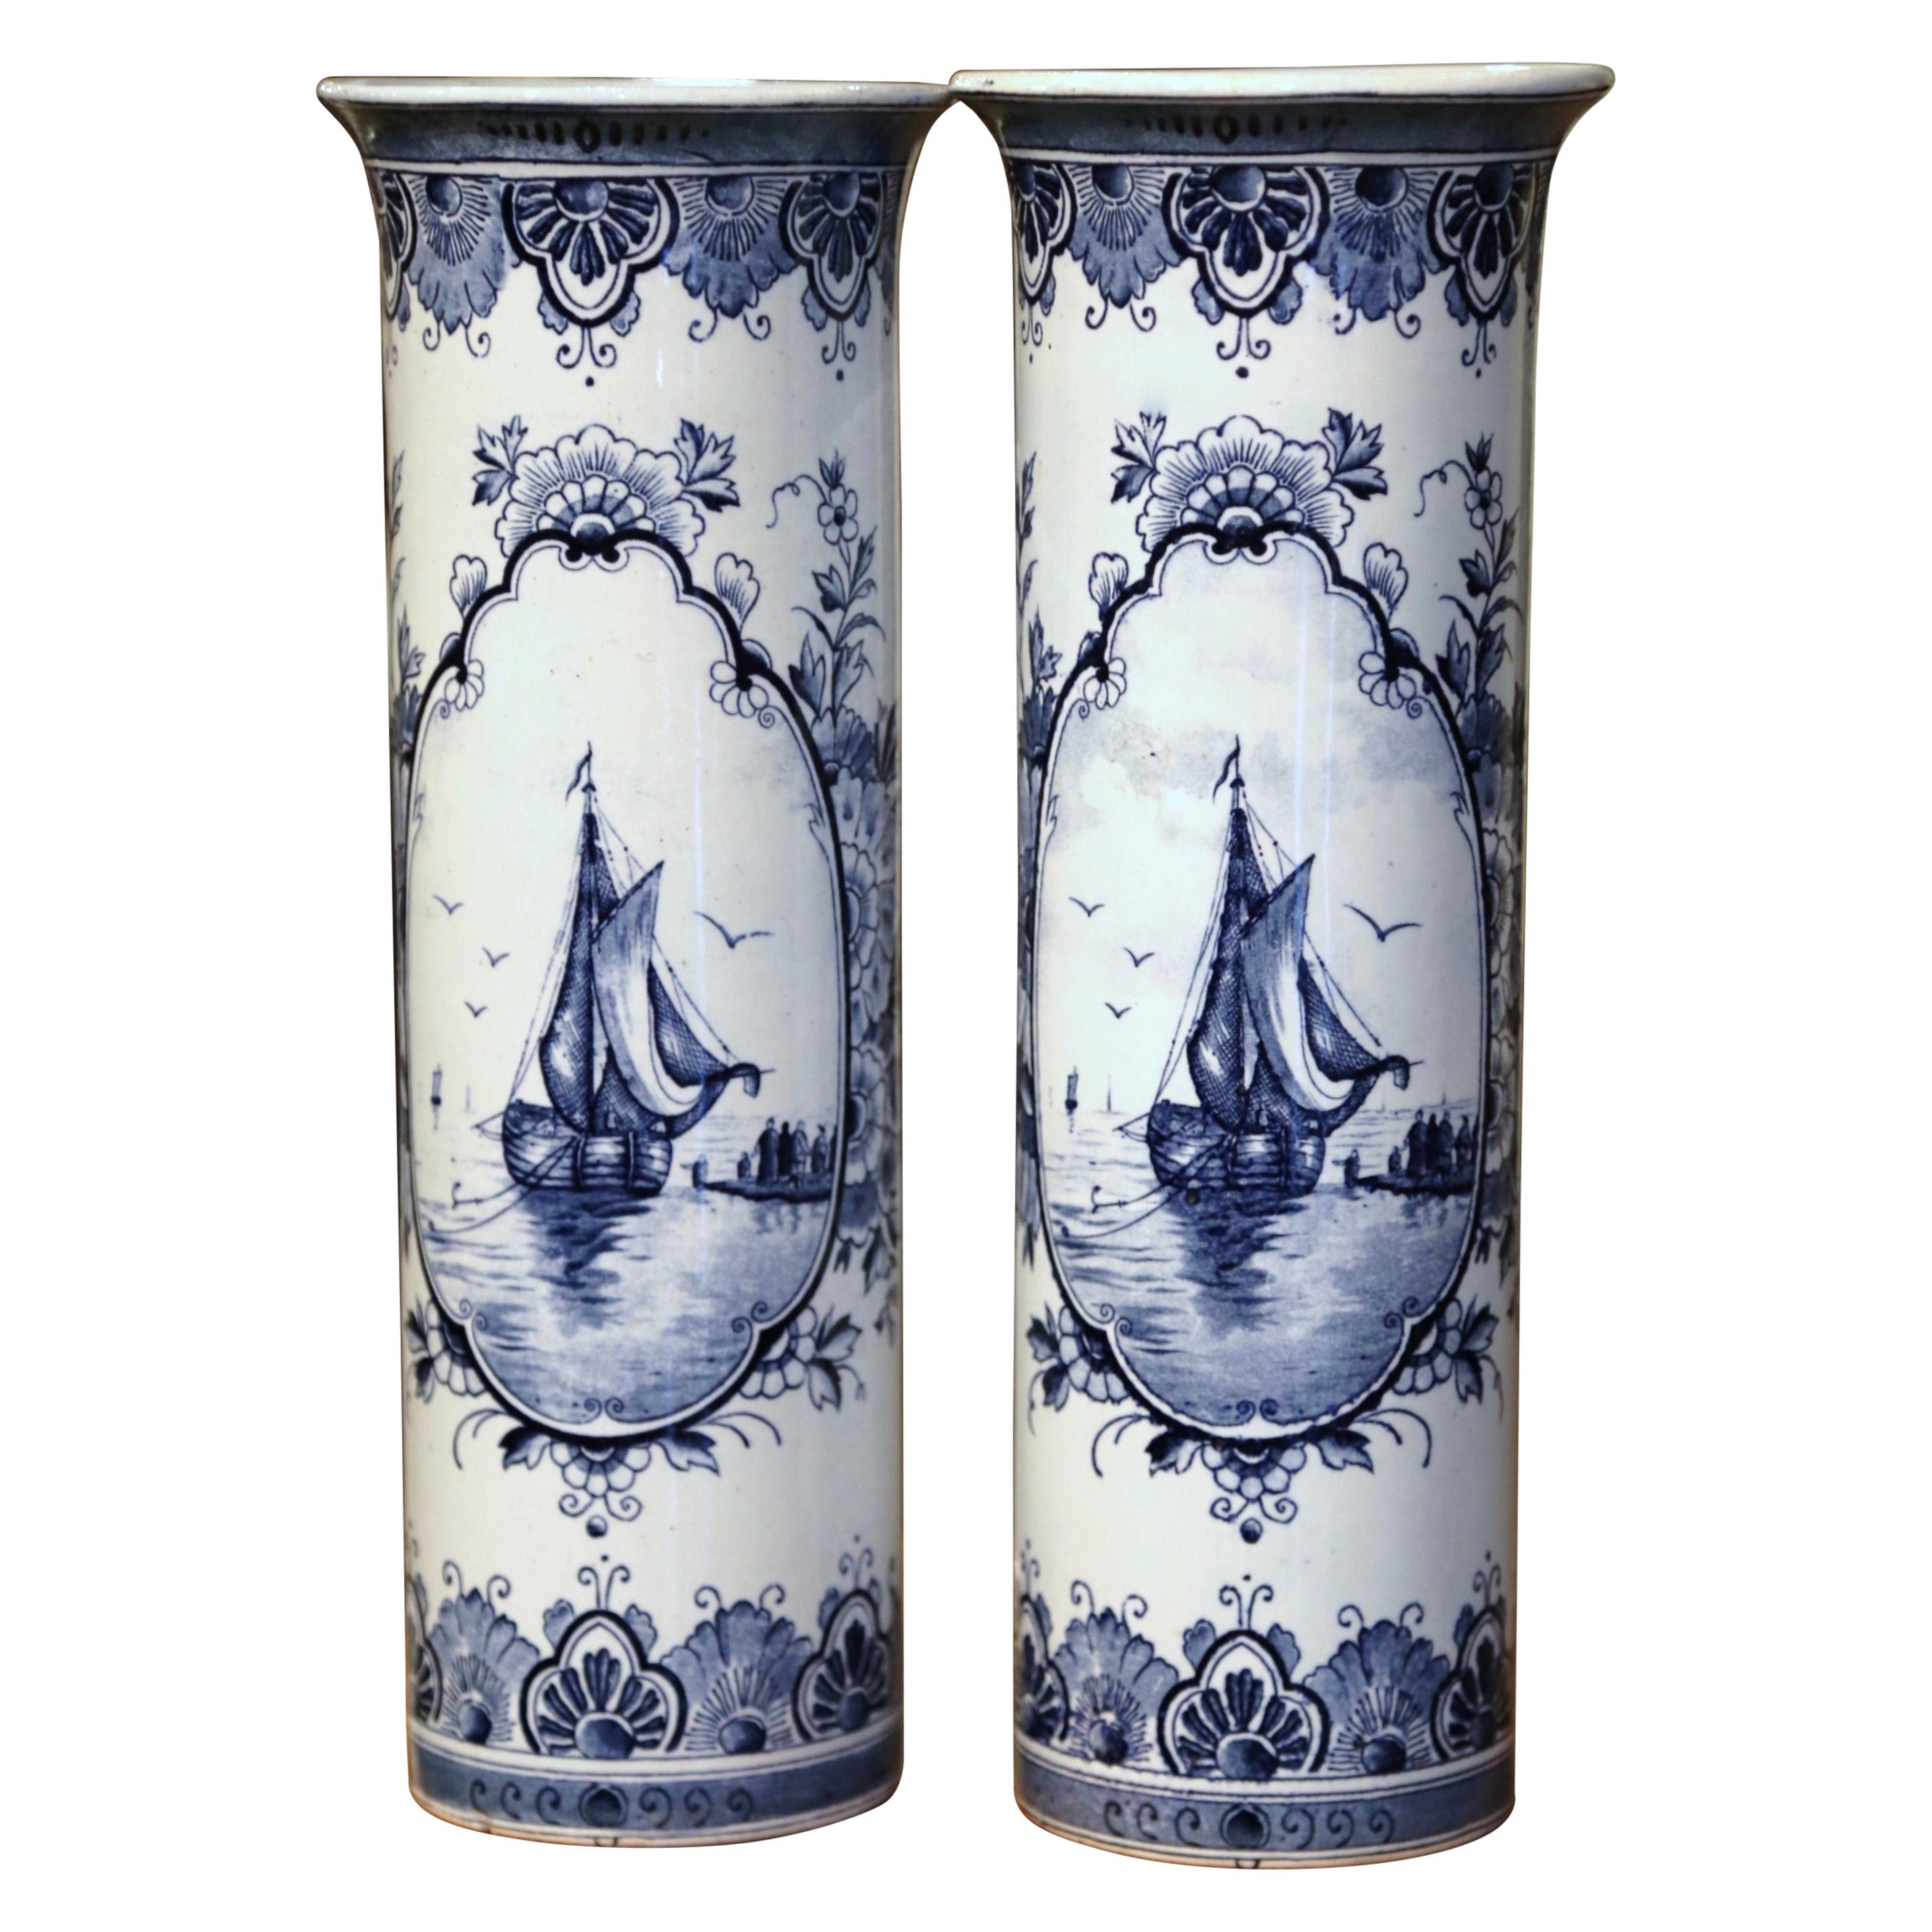 Pair of 19th Century Dutch Hand Painted Faience Delft Vases with Sailboat Motifs For Sale